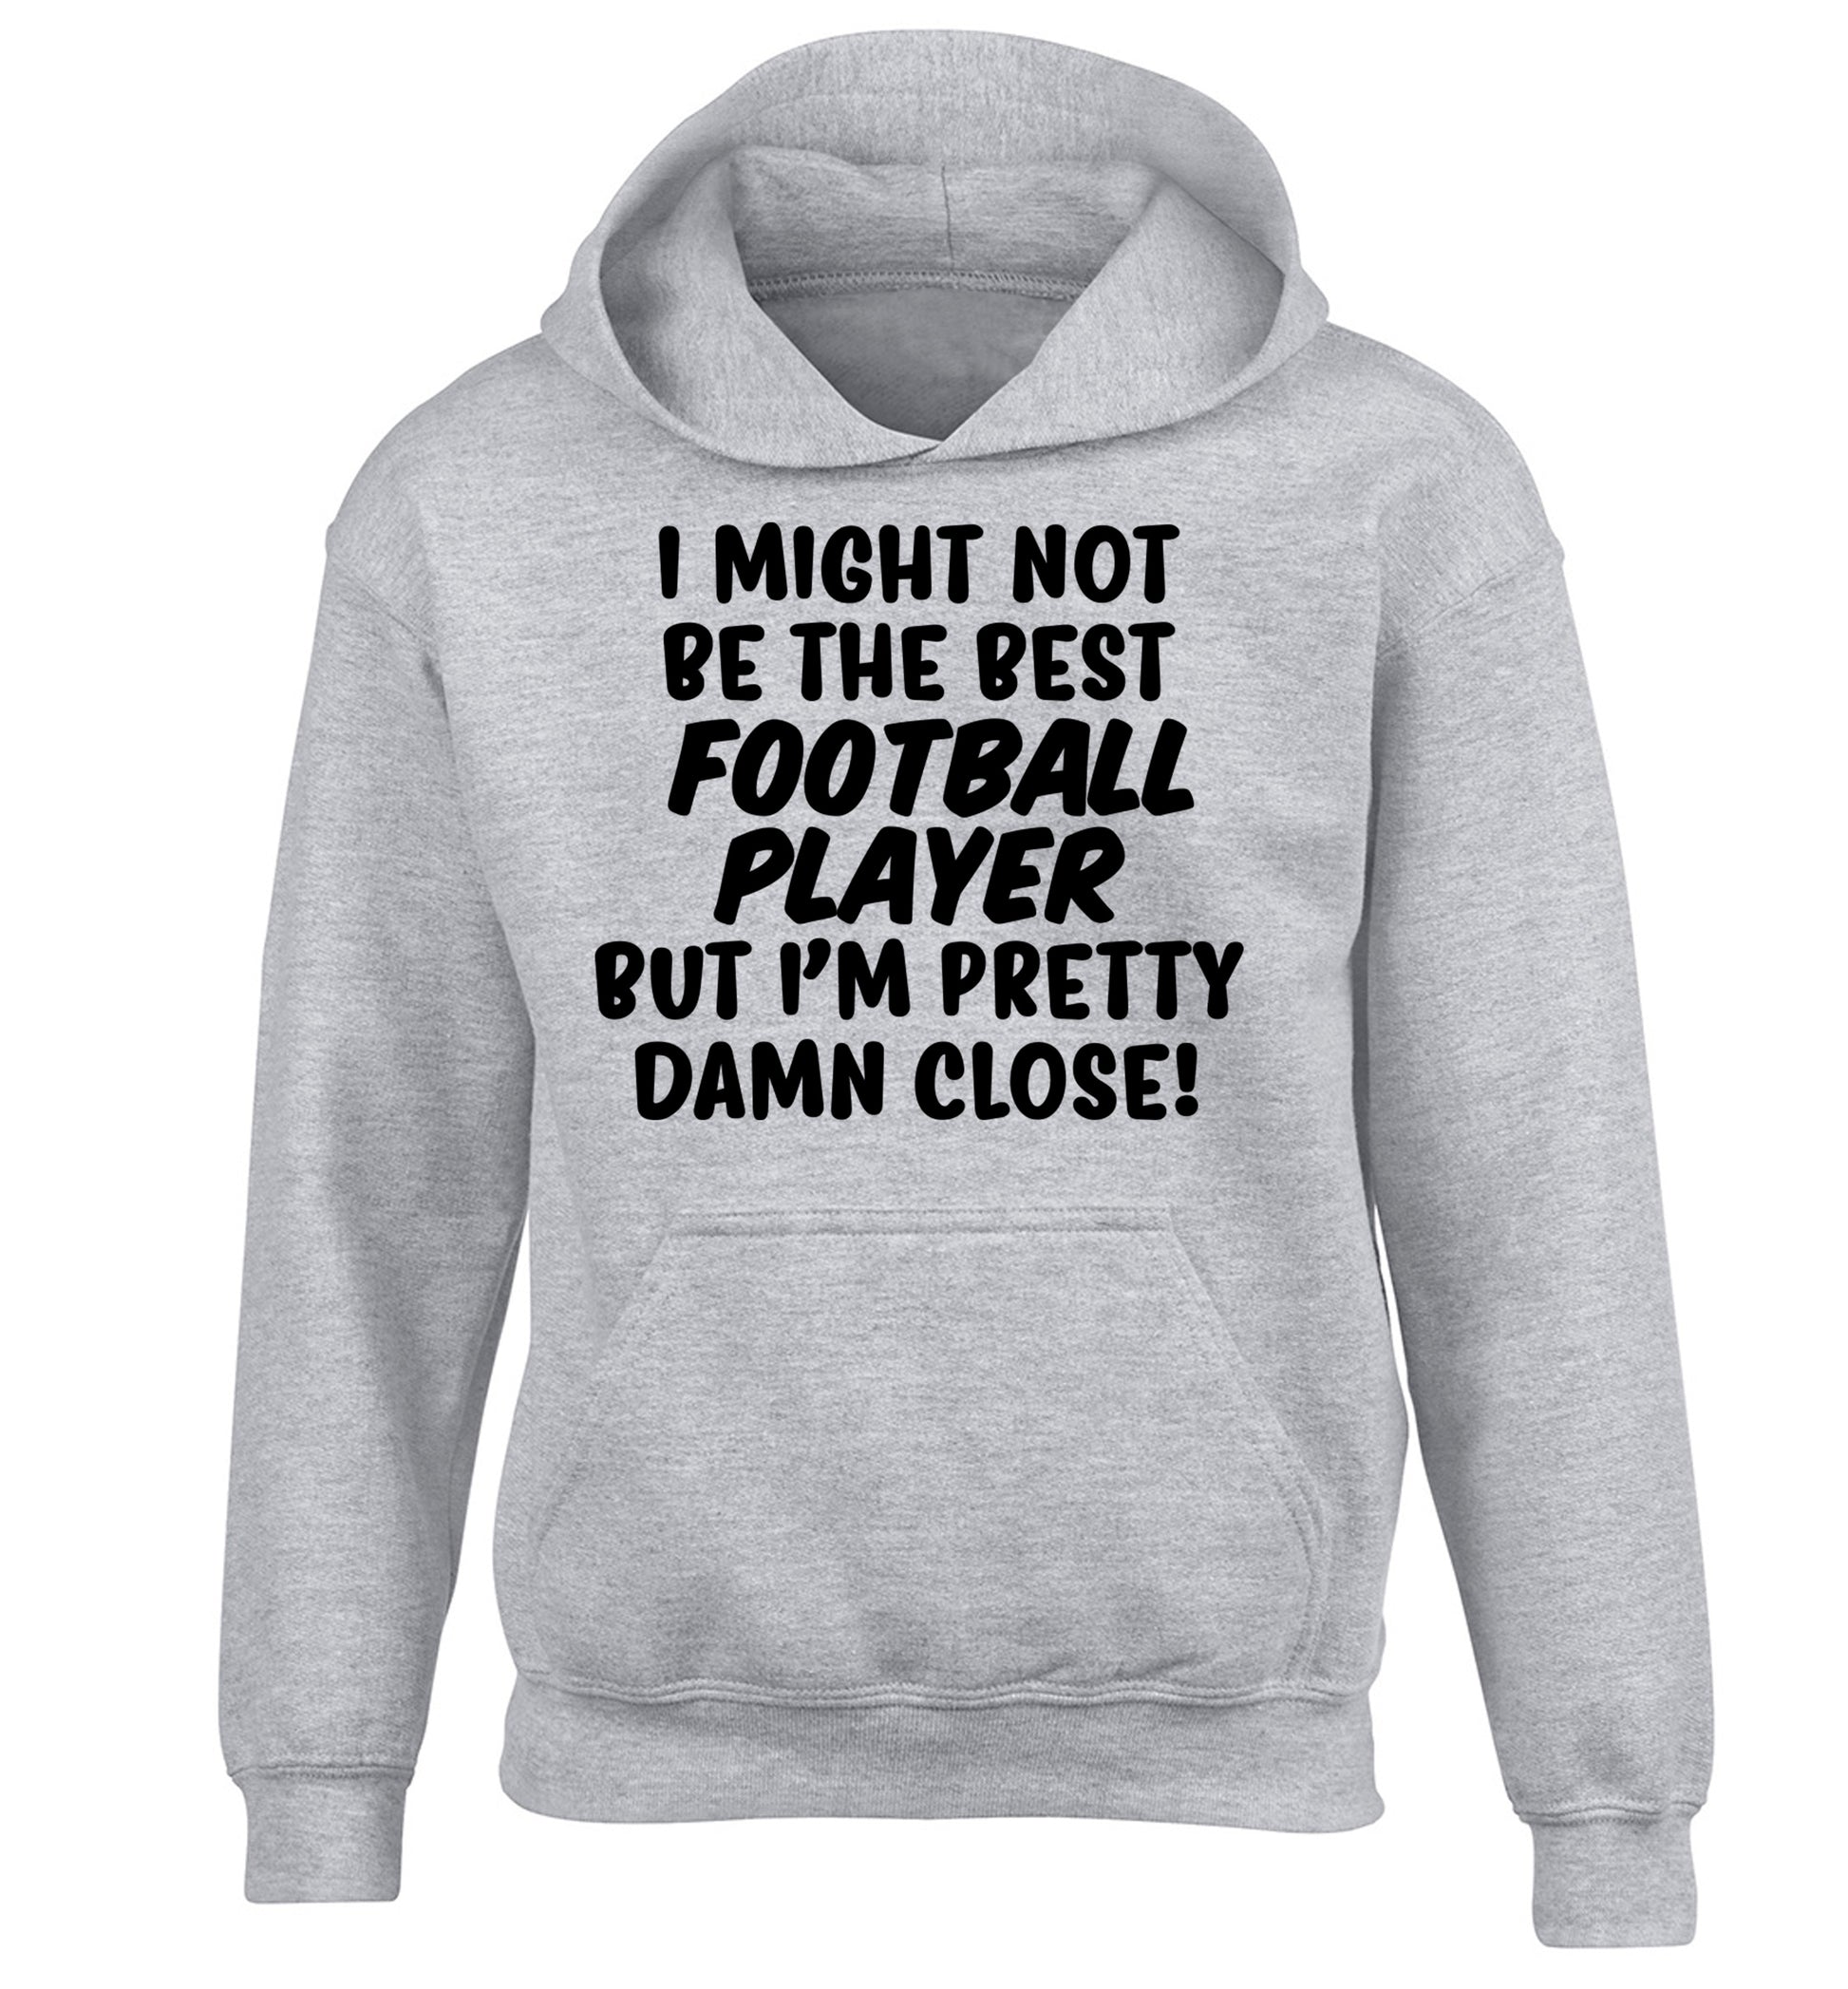 I might not be the best football player but I'm pretty close! children's grey hoodie 12-14 Years